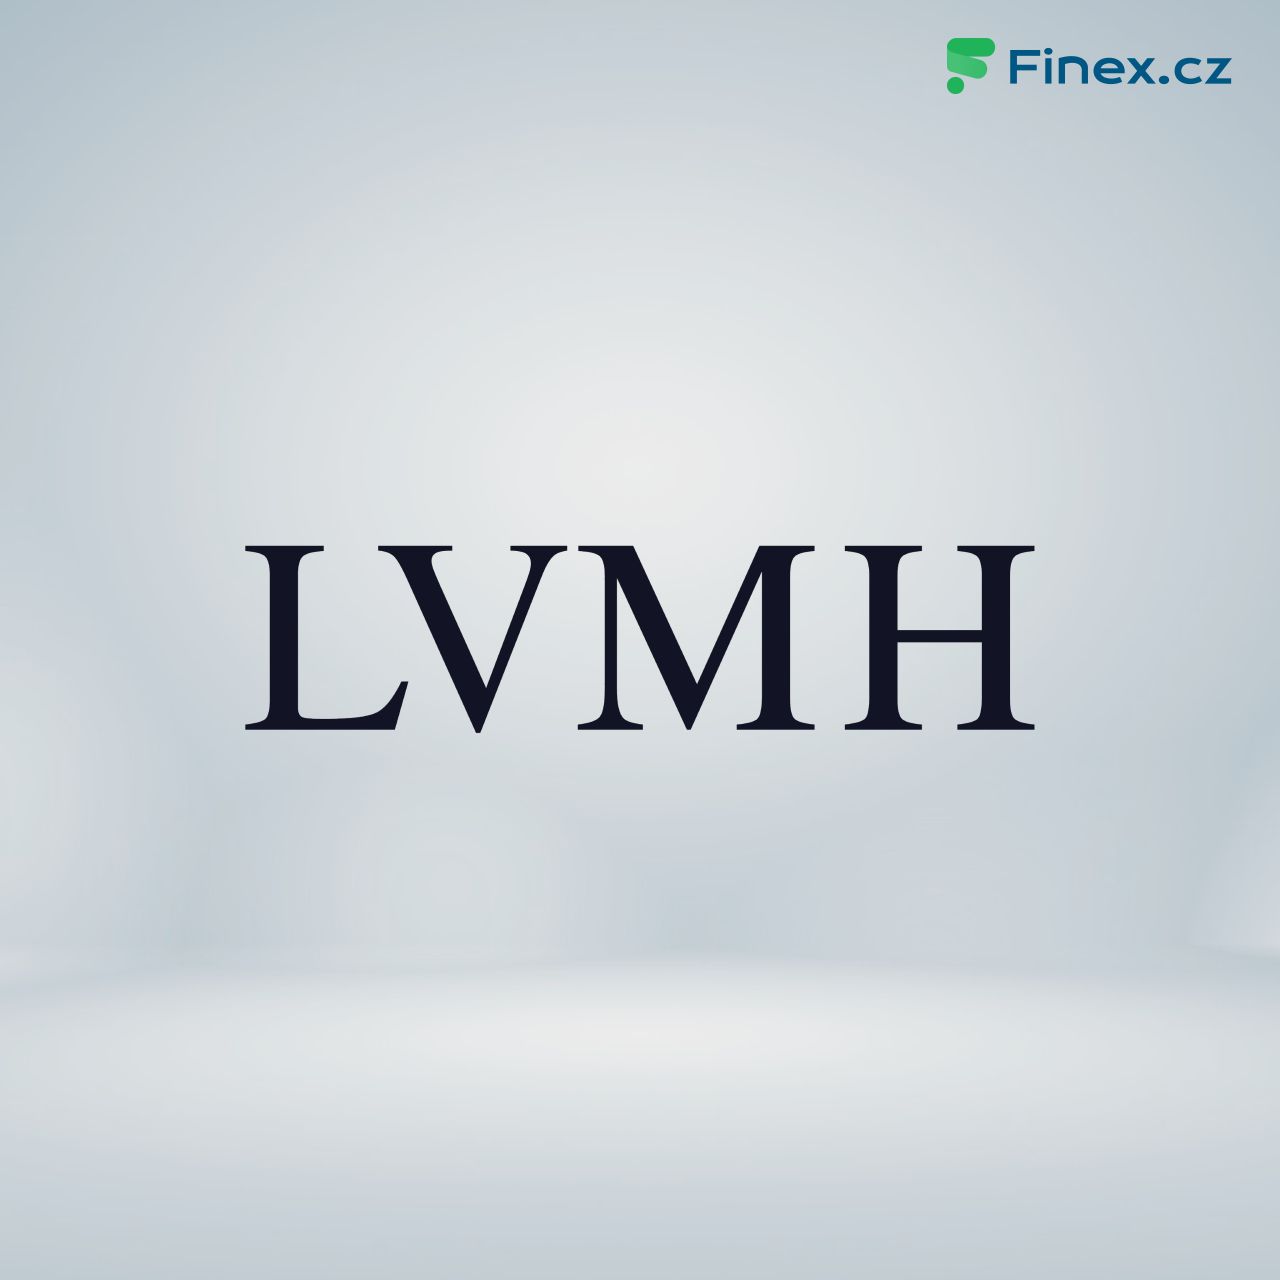 Louis Vuitton Moët Hennessy (LVMH) on the hunt to buy Canadian